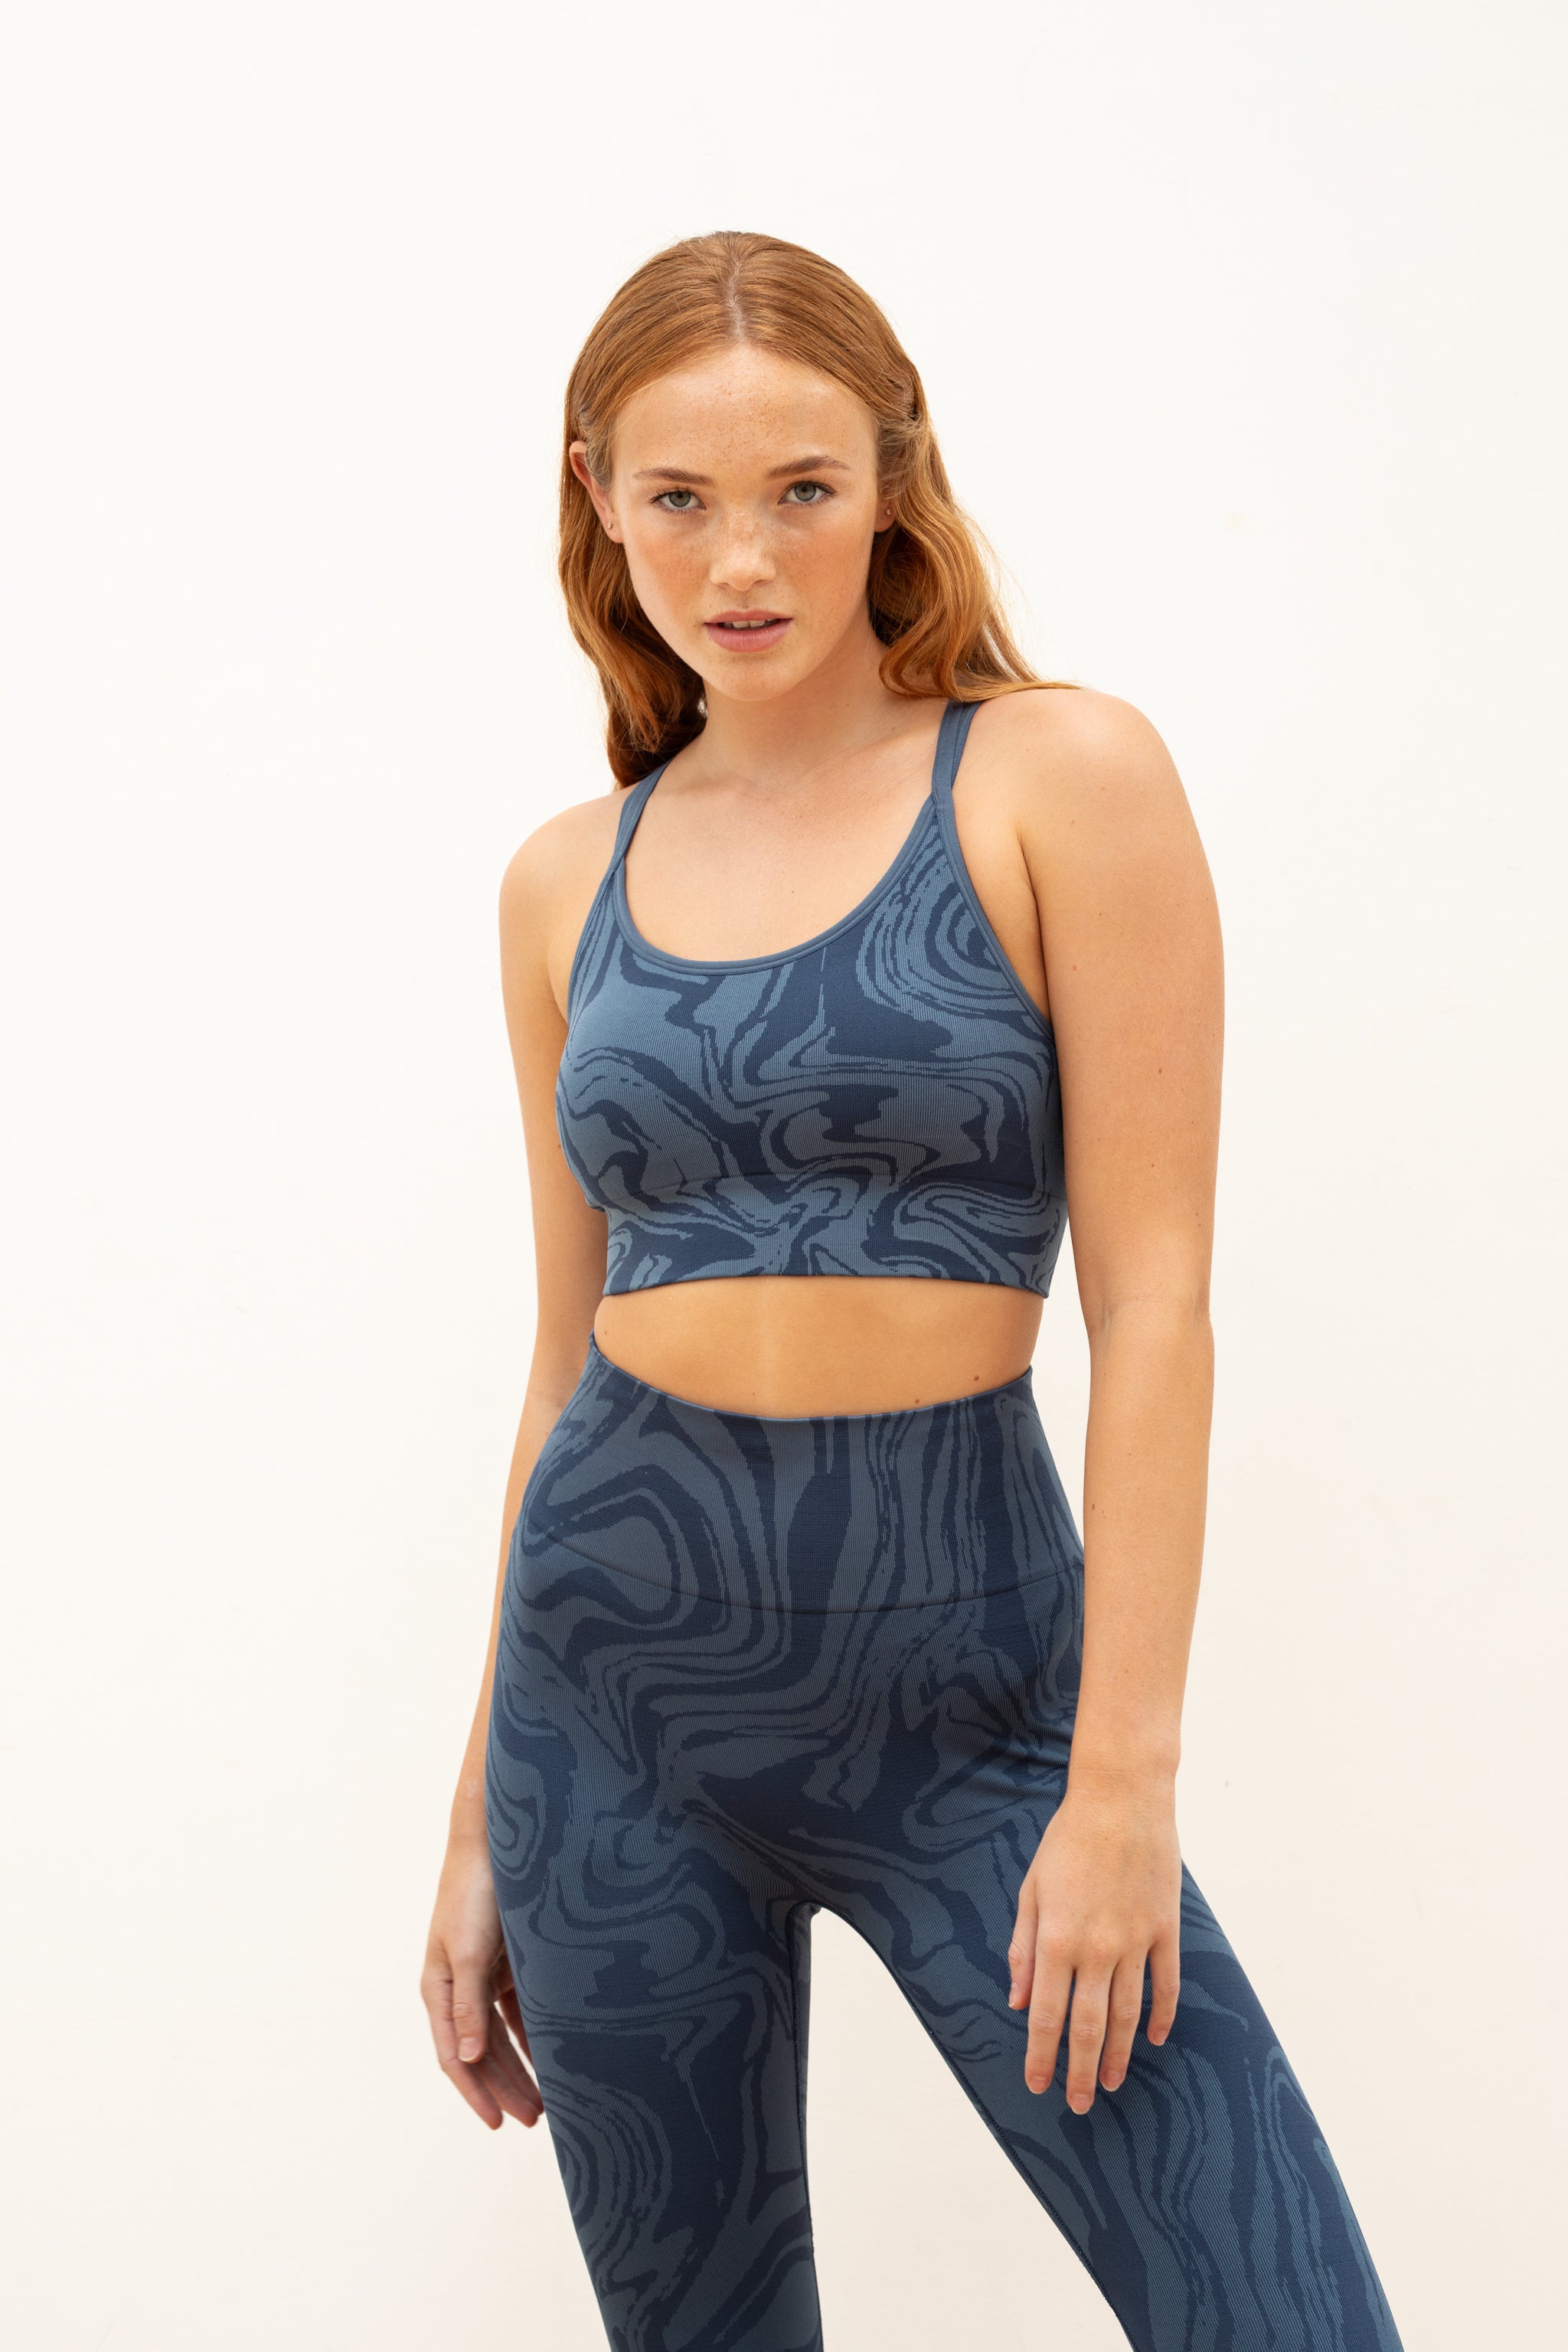 Denim blue recycled seamless marble print low to medium impact supportive sports bra for yoga, pilates, spinning, weights, running and exercise by sustainable activewear brand Jilla Active 